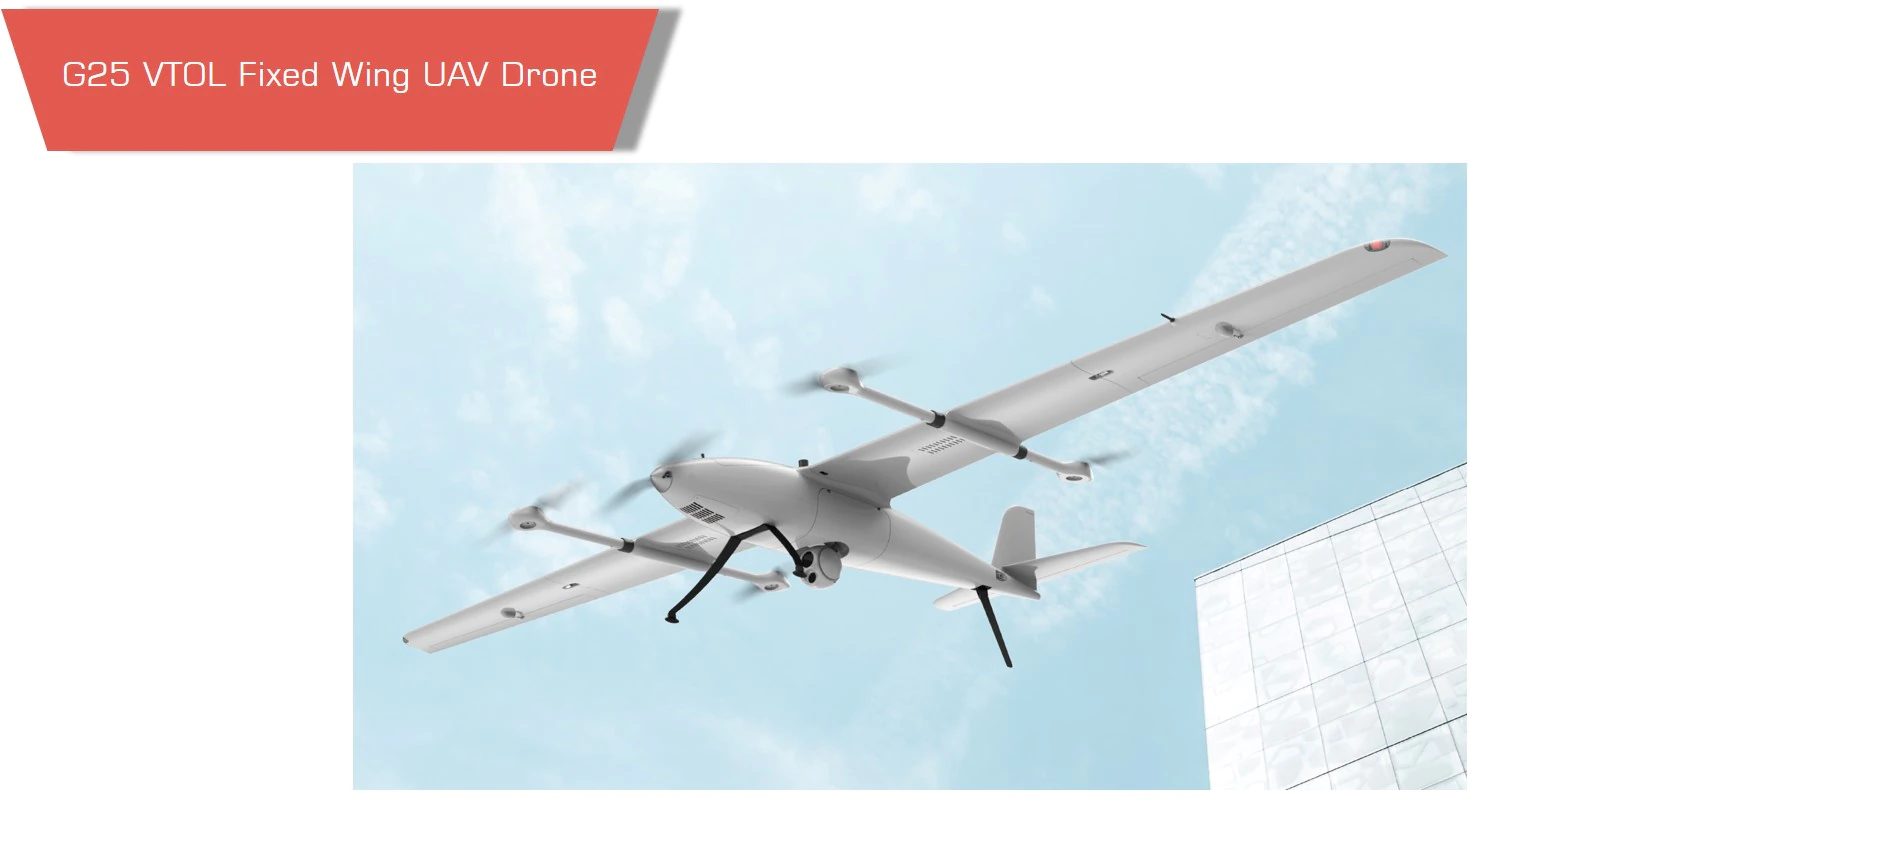 G25 vtol fixed wing uav drone for survey and rescue with easy changeable payload bin p6 motionew